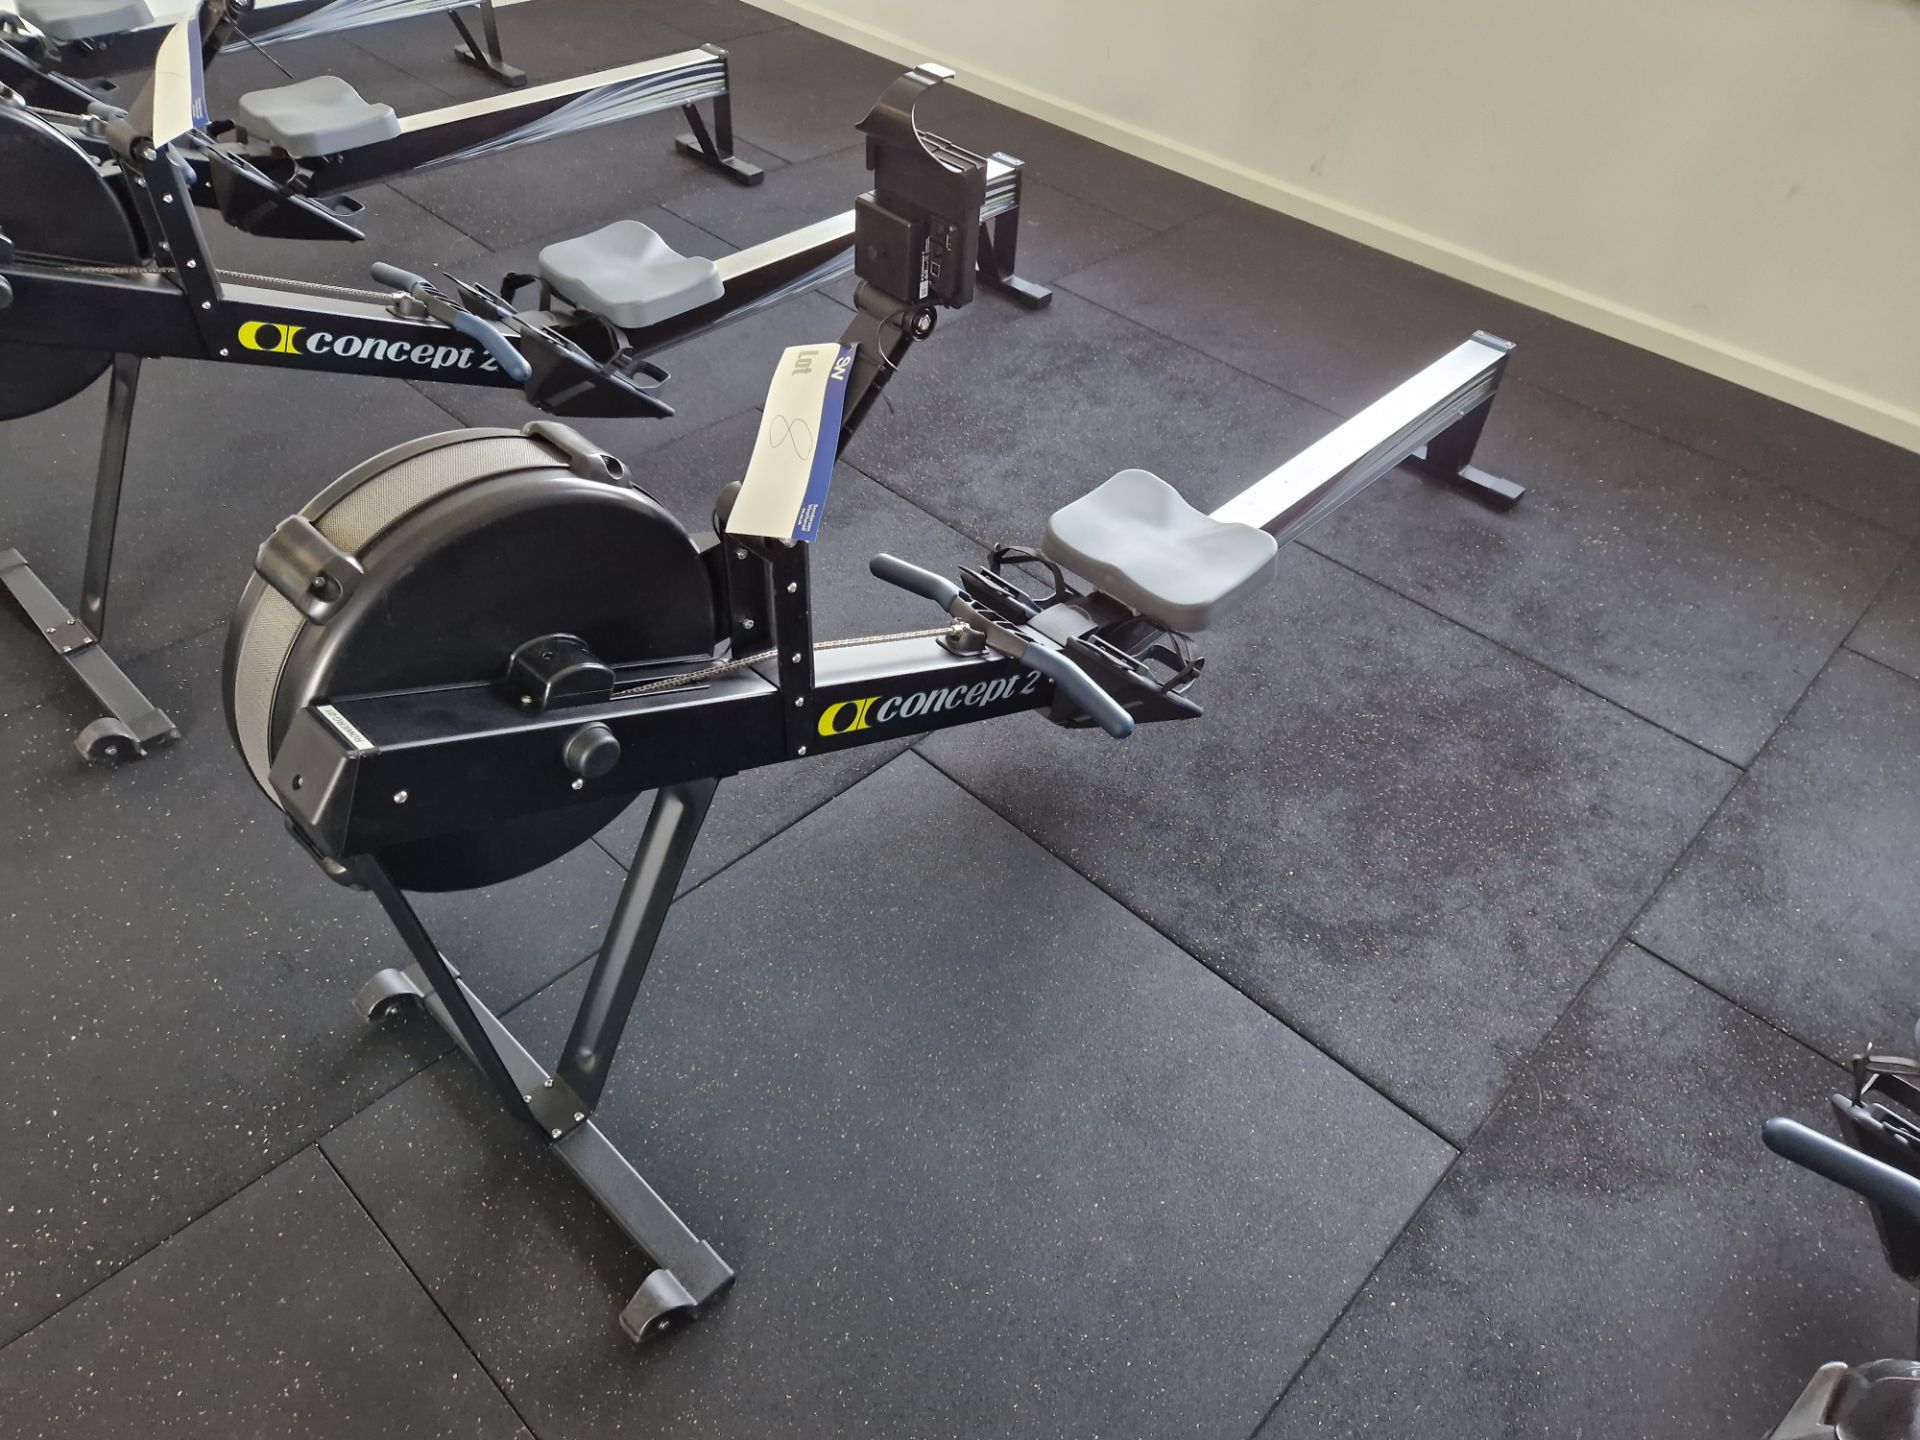 Concept 2 Model D Indoor Rower, Serial No. 431129004, Date Code 092820 Please read the following - Image 2 of 4